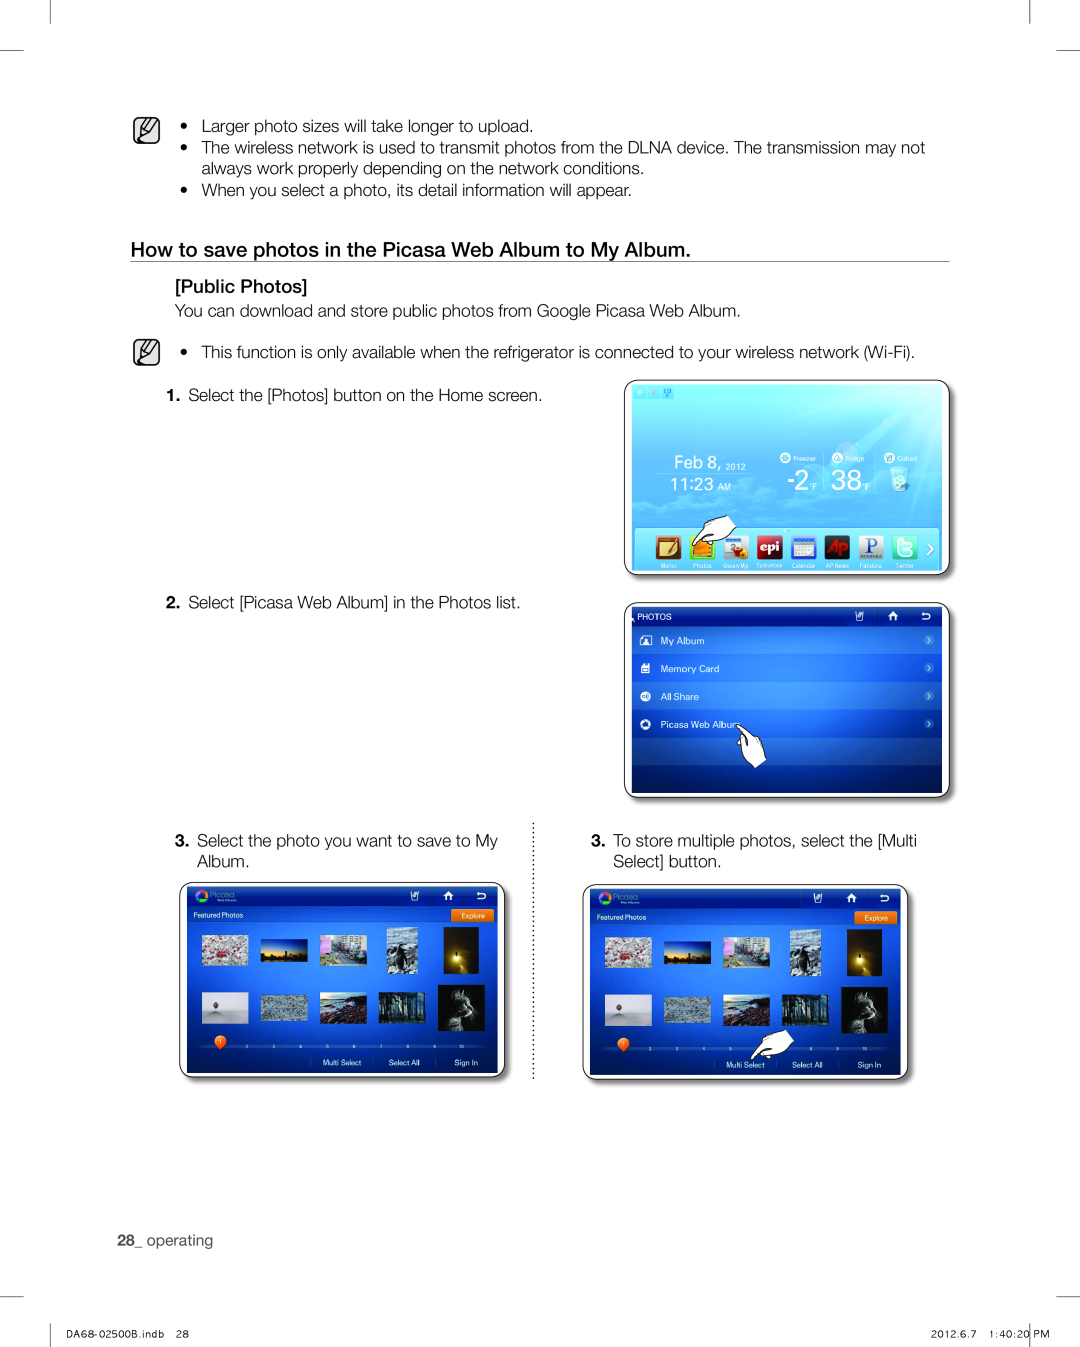 Samsung RSG309AARS user manual How to save photos in the Picasa Web Album to My Album, Public Photos 